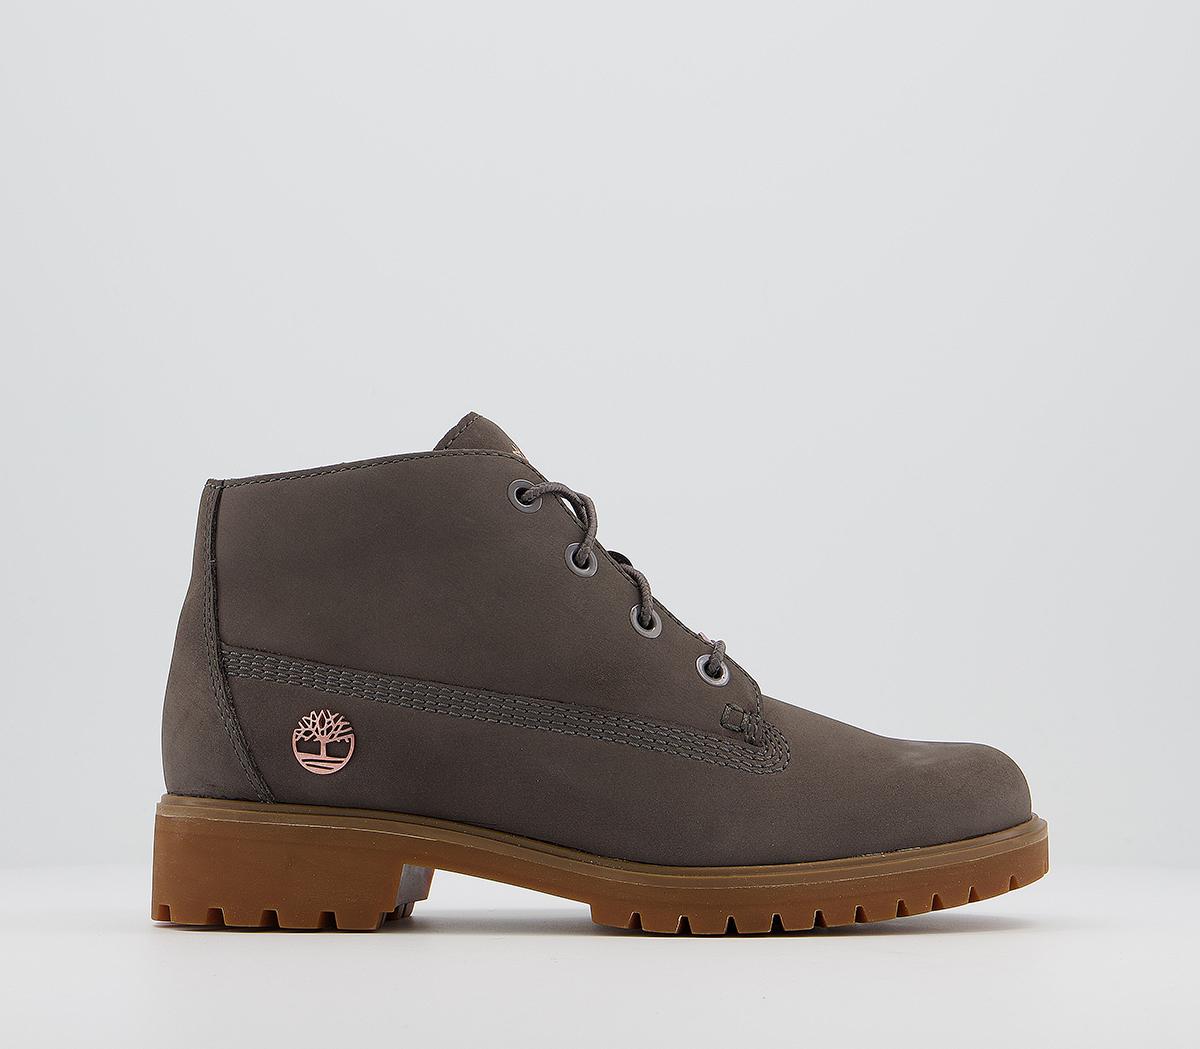 TimberlandSlim Nellie Chukka BootsEiffel Tower Rose Gold